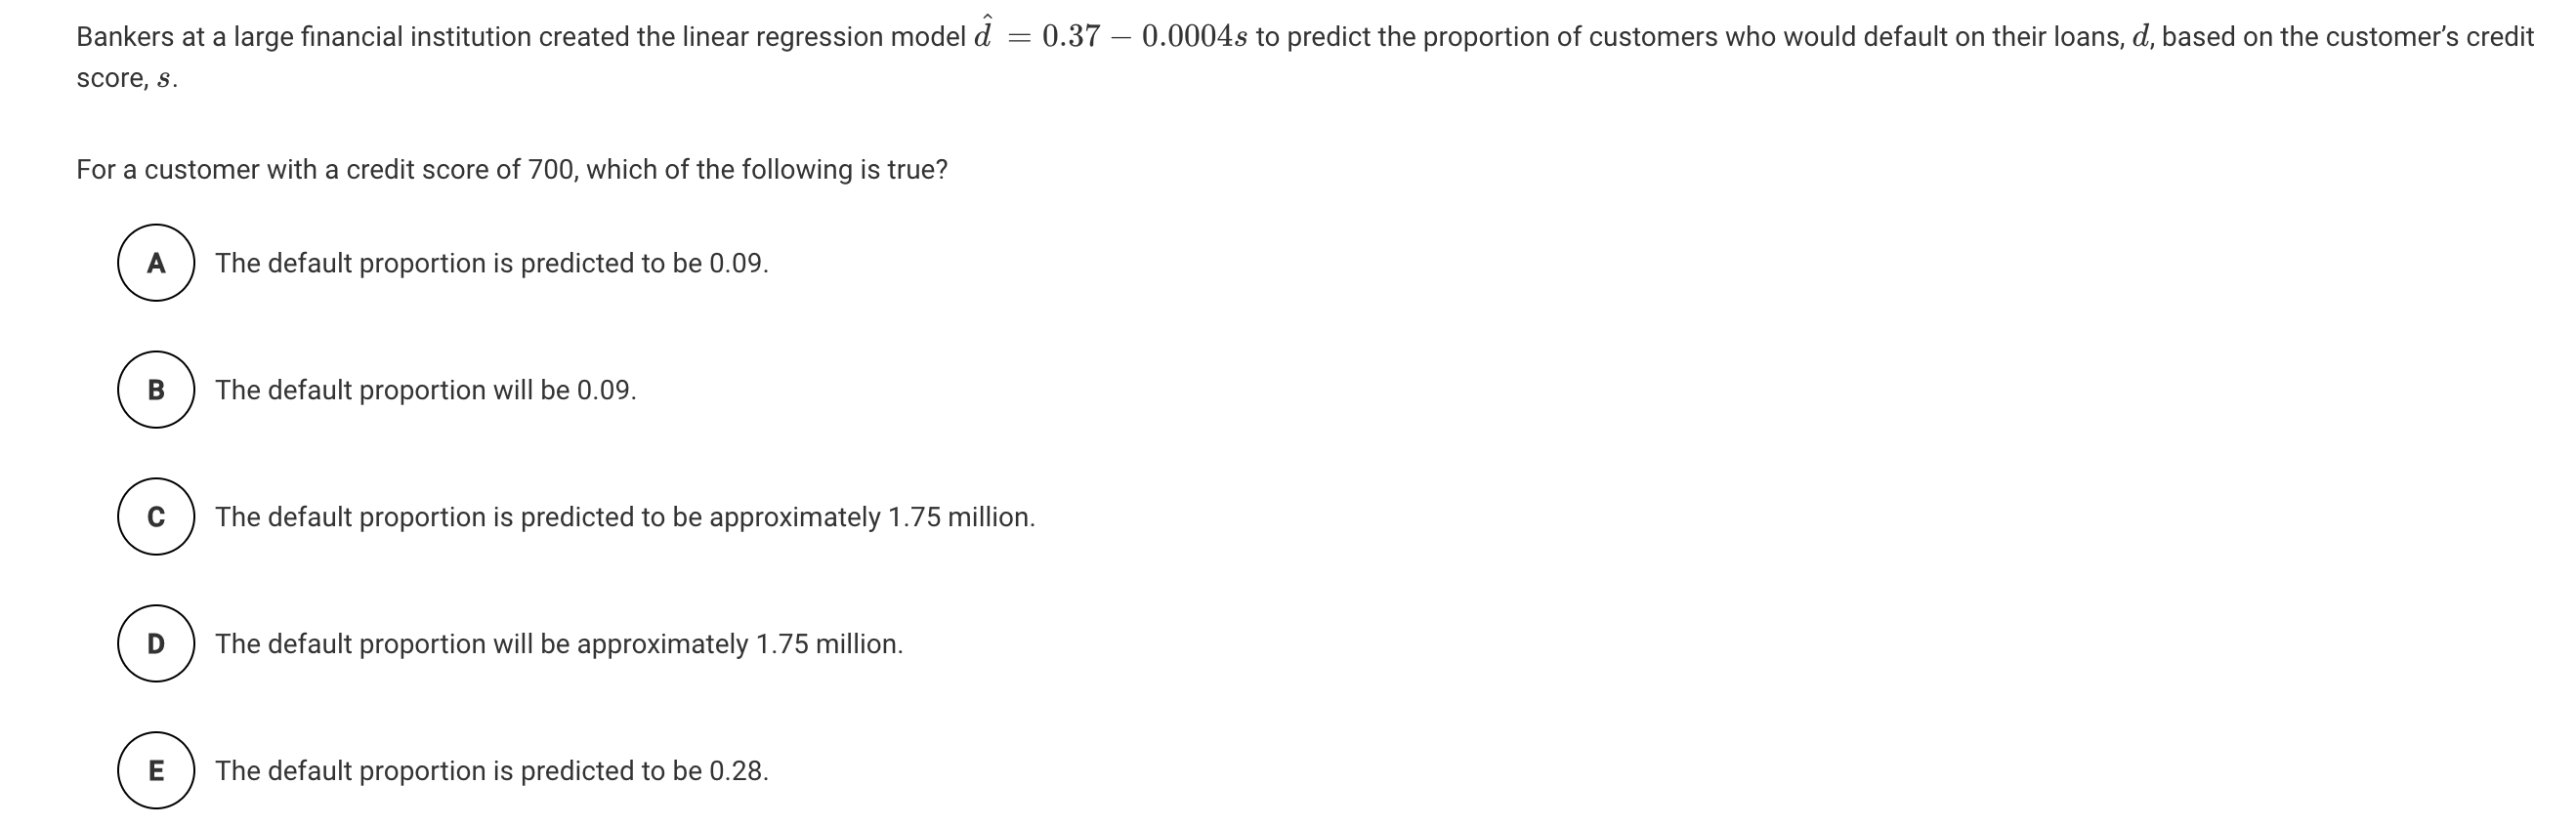 Bankers at a large financial institution created the linear regression model d = 0.37 – 0.0004s to predict the proportion of customers who would default on their loans, d, based on the customer's credit
score, s.
For a customer with a credit score of 700, which of the following is true?
A
The default proportion is predicted to be 0.09.
В
The default proportion will be 0.09.
The default proportion is predicted to be approximately 1.75 million.
The default proportion will be approximately 1.75 million.
E
The default proportion is predicted to be 0.28.
